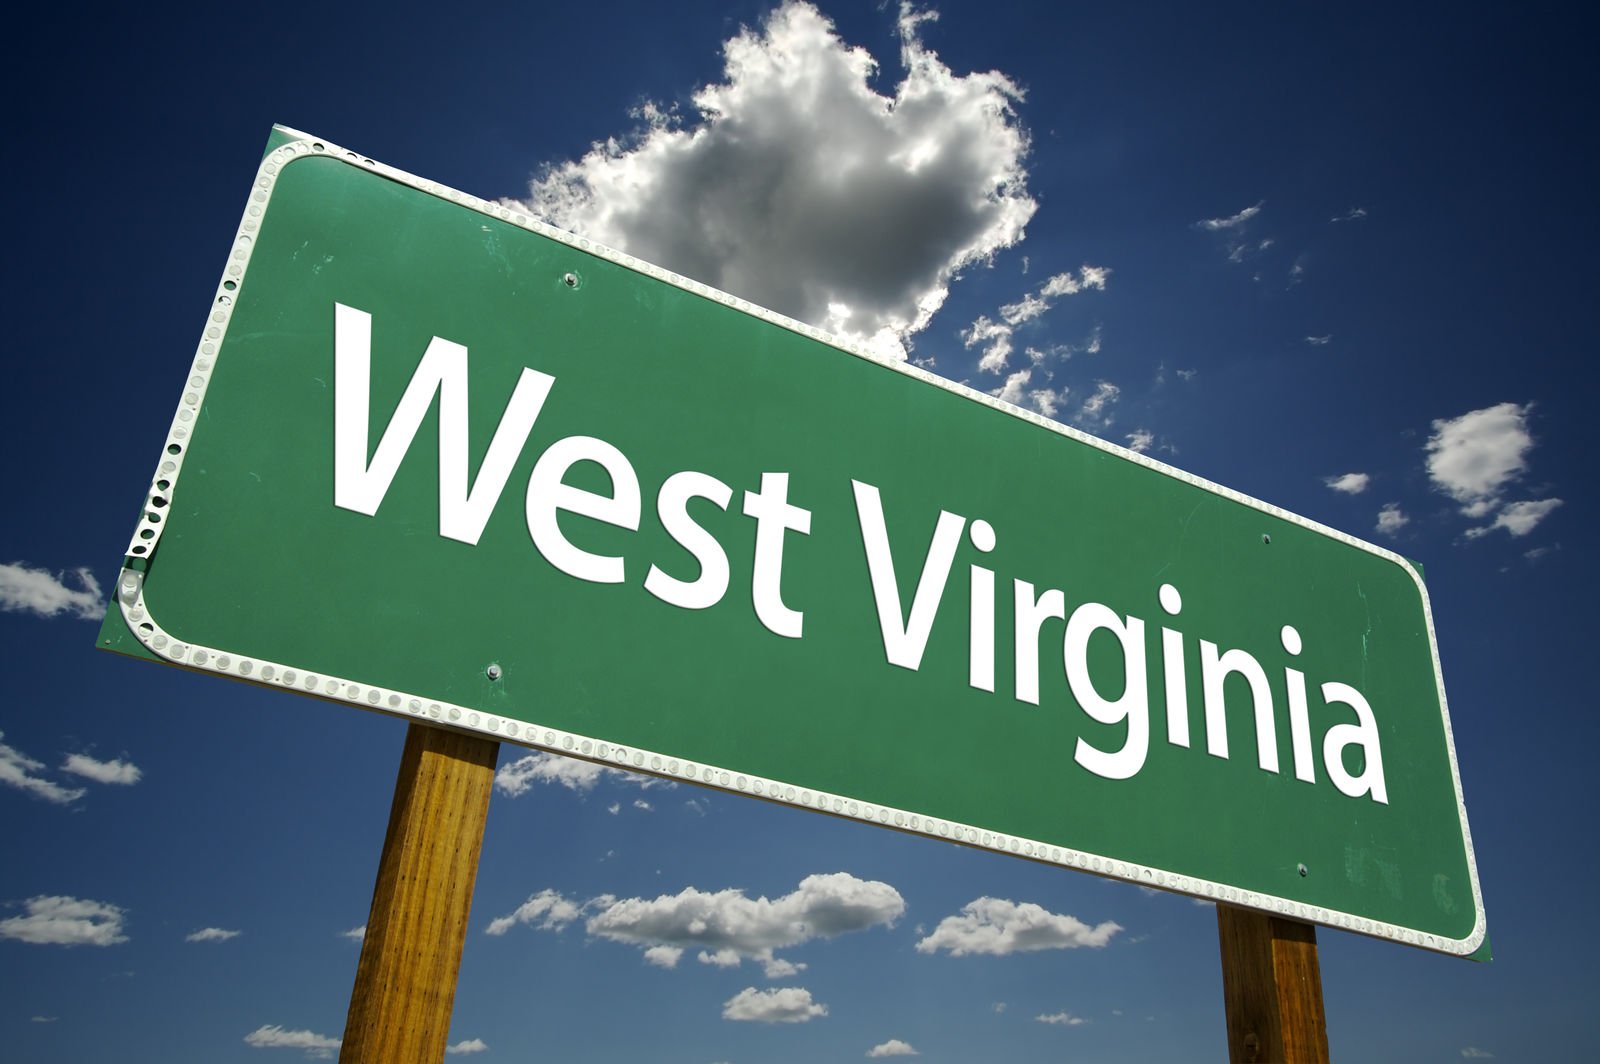 What is the penalty for driving without insurance in West Virginia?